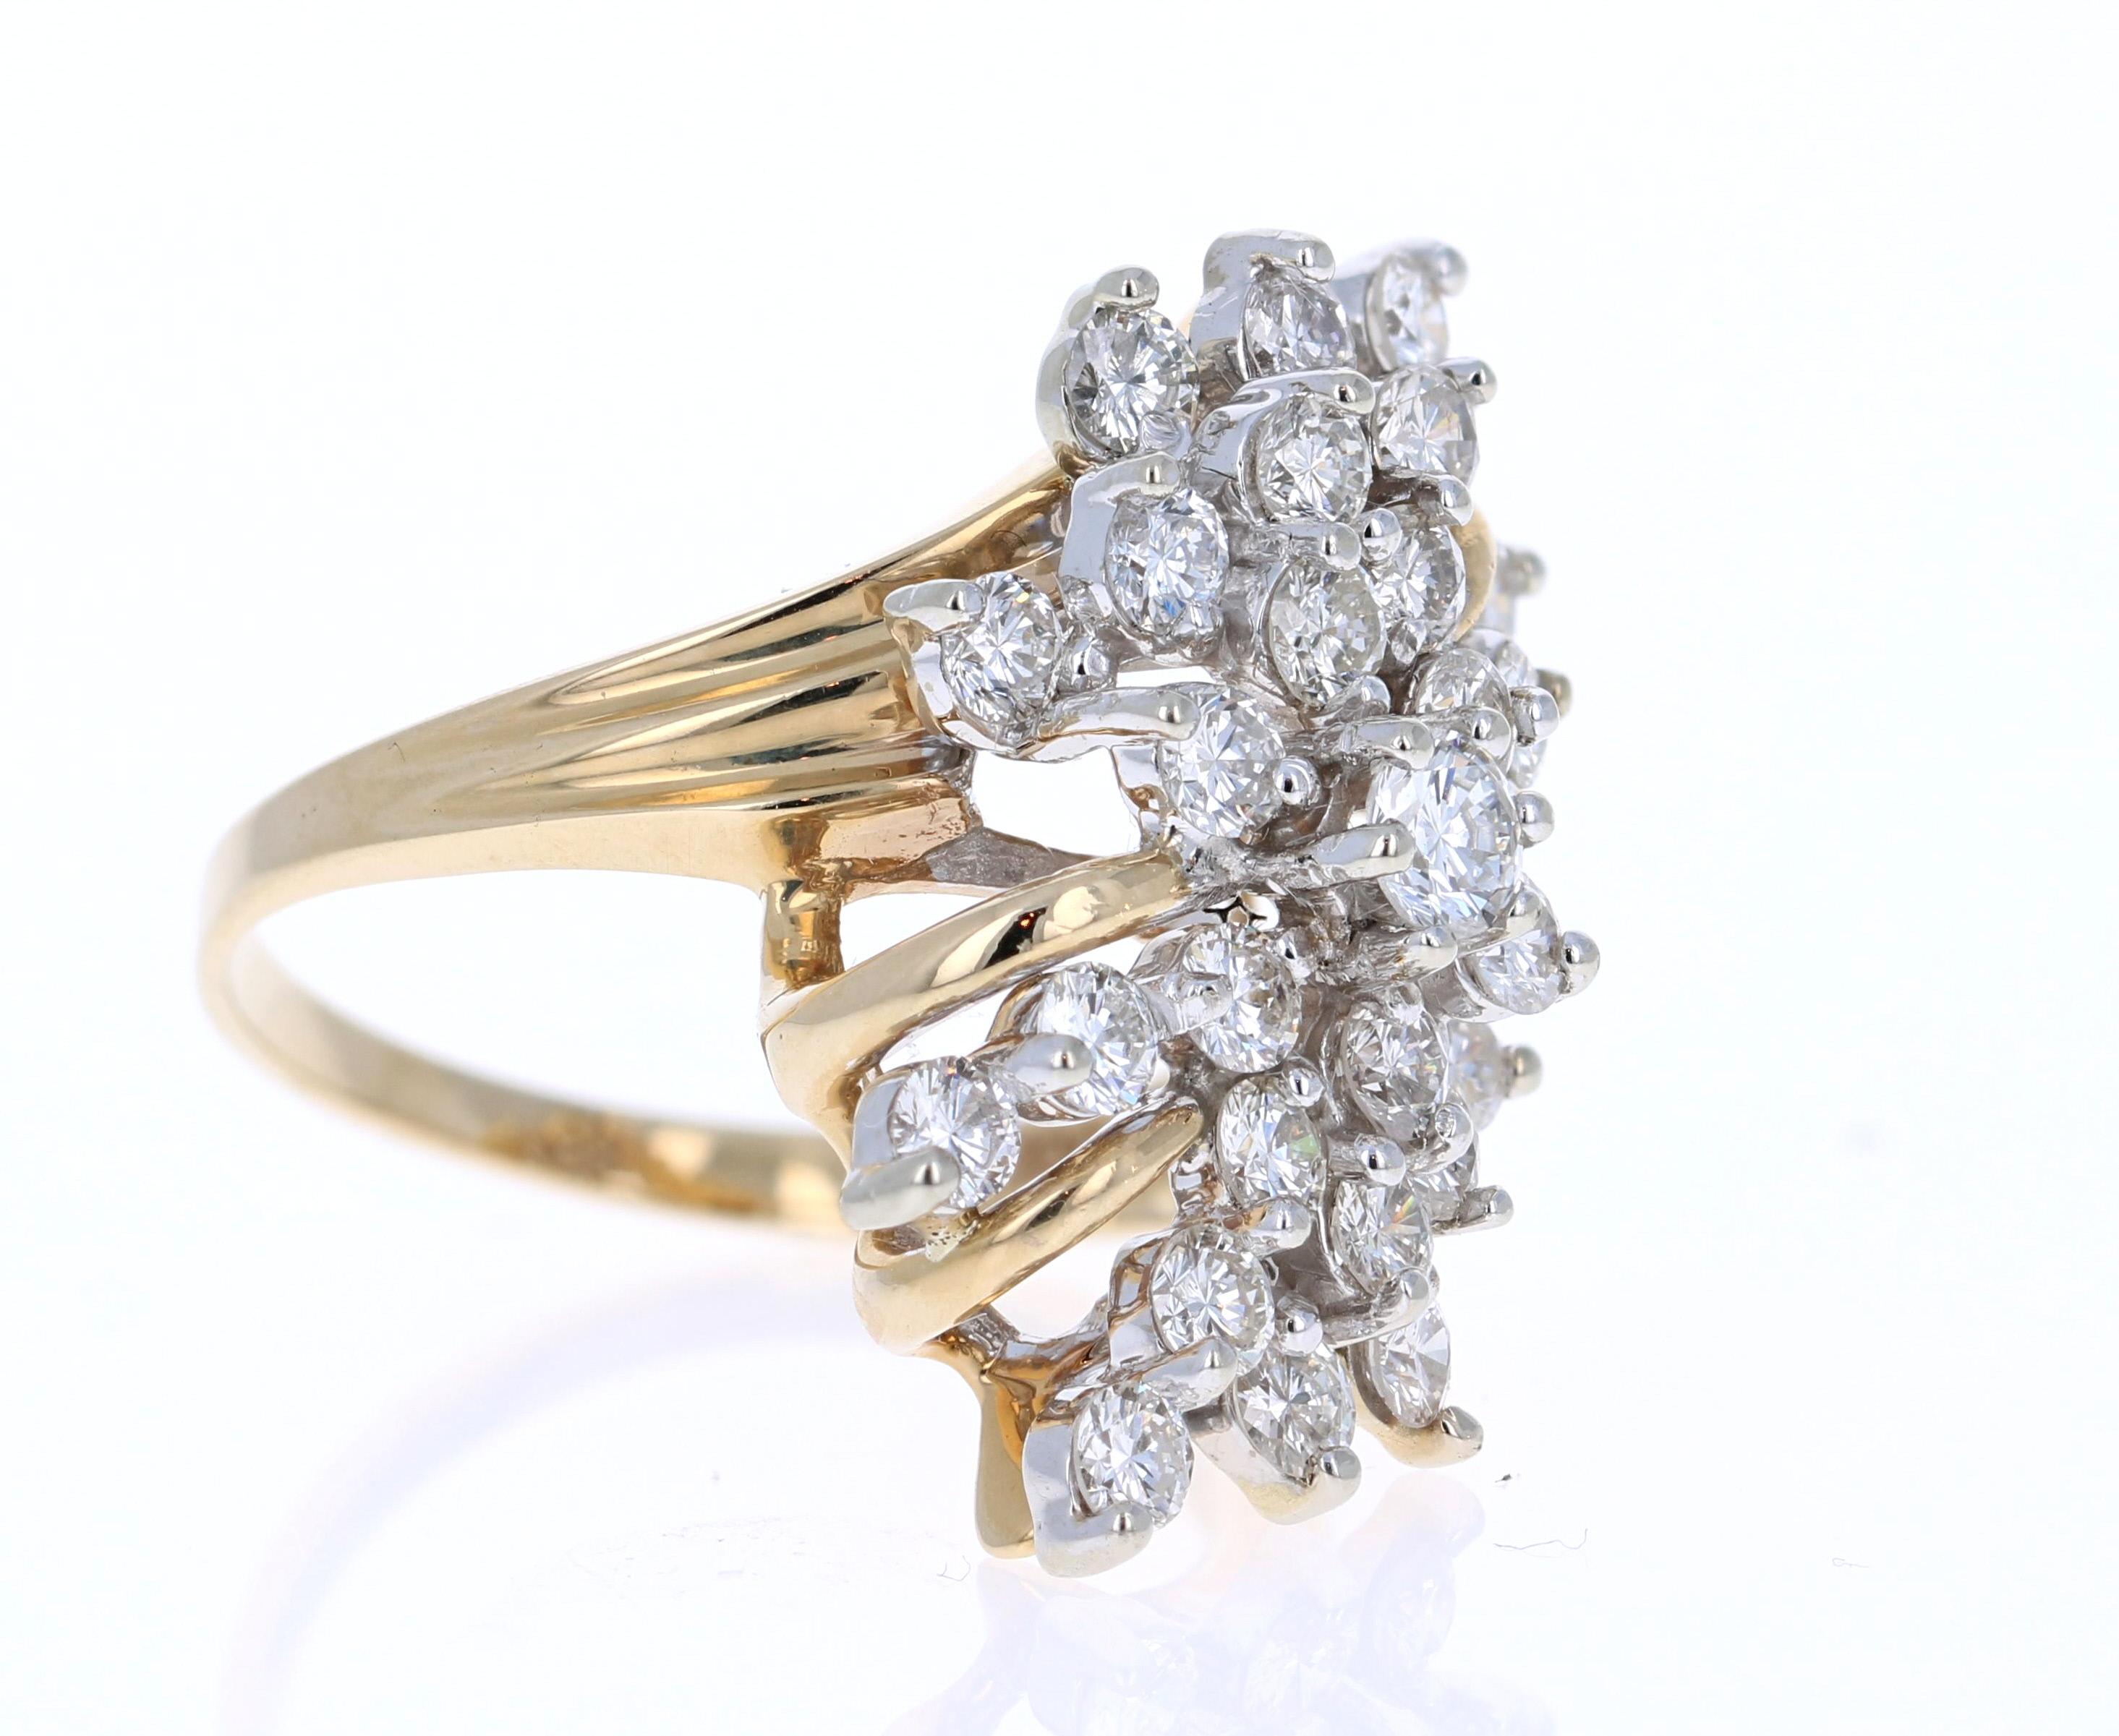 This unique cluster ring has 27 Round Cut Diamond that weigh 2.00 Carats (Clarity: VS, Color: F)

The ring is set in 14 Karat Yellow Gold and has an approximate weight of 7.4 grams. 

The ring is a size 7 and can be re-sized free of charge if